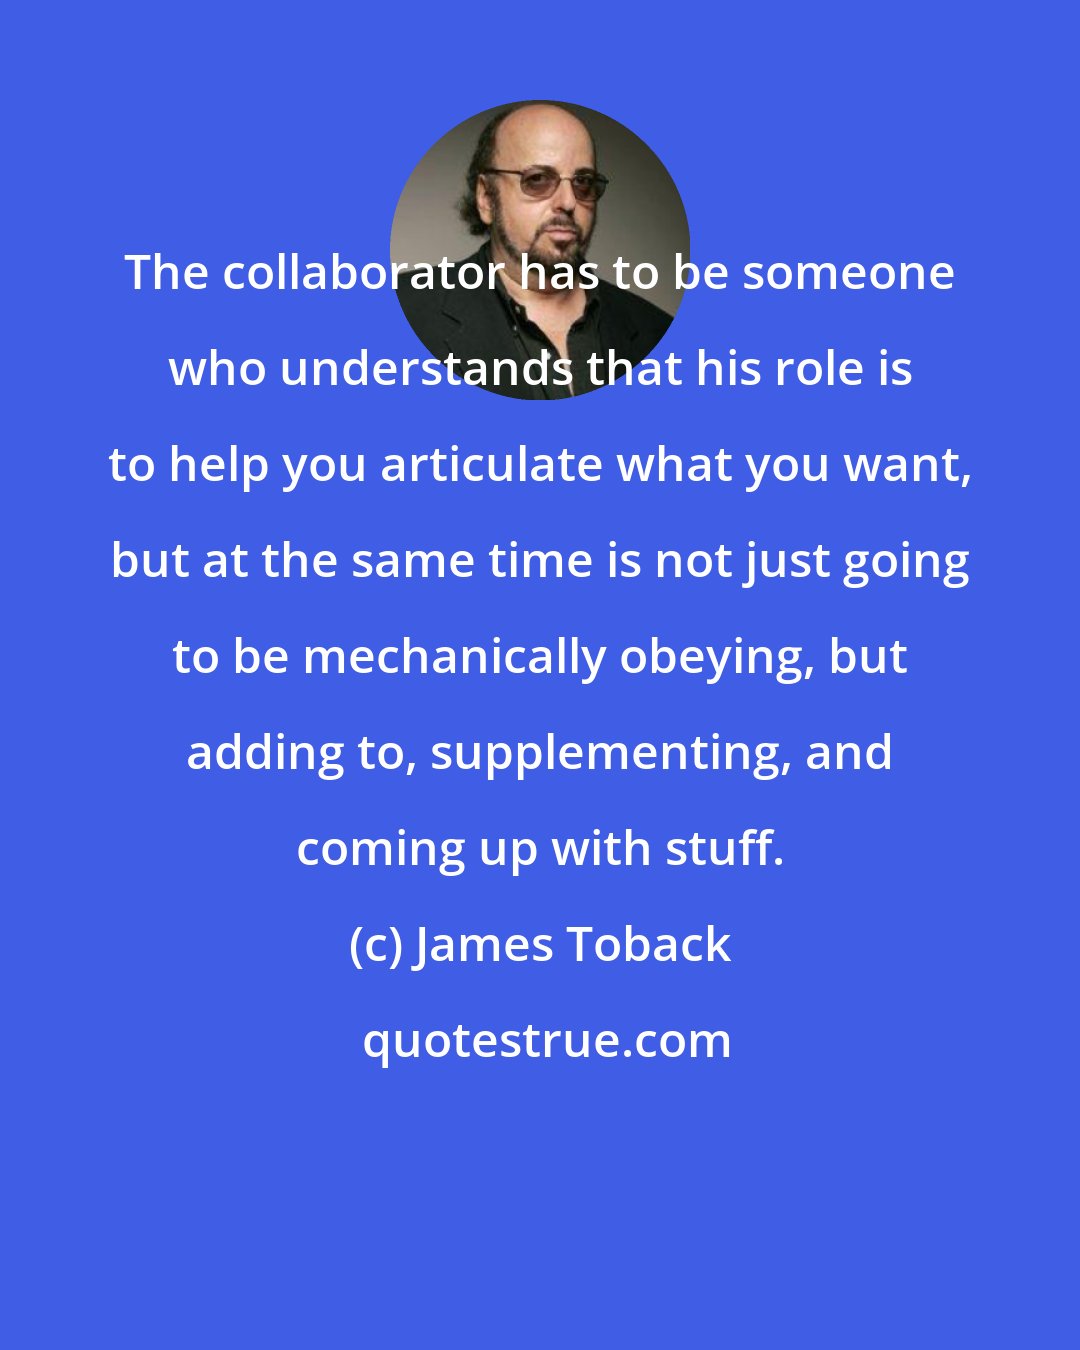 James Toback: The collaborator has to be someone who understands that his role is to help you articulate what you want, but at the same time is not just going to be mechanically obeying, but adding to, supplementing, and coming up with stuff.